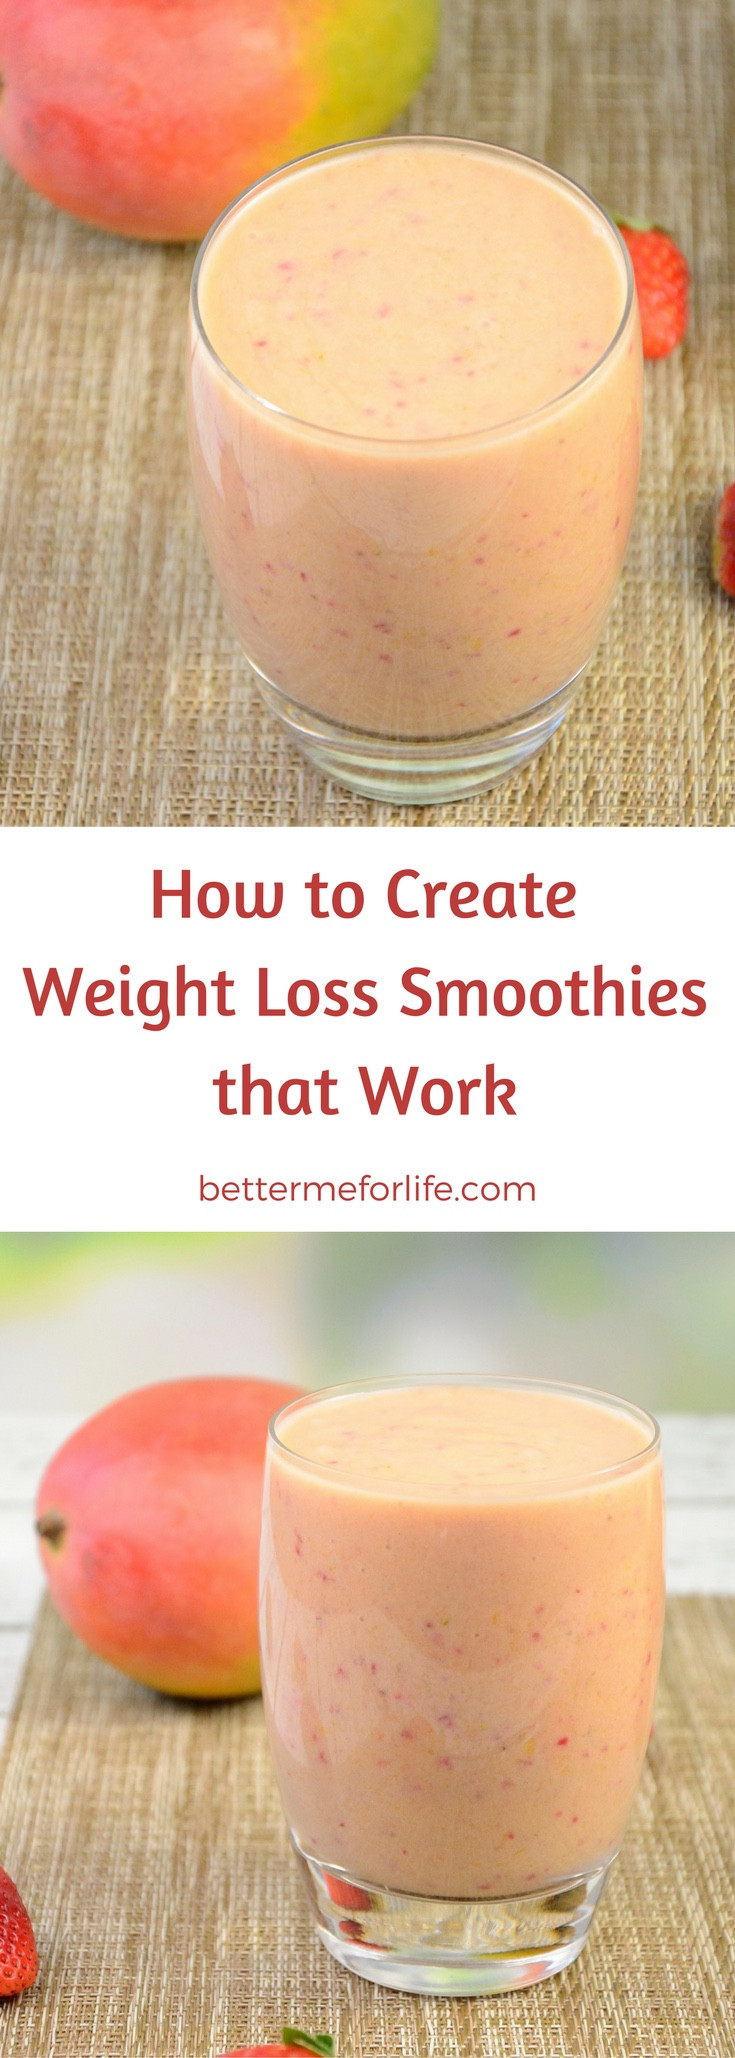 Weight Loss Smoothies That Work
 How to Create Weight Loss Smoothies Guide Better Me for Life